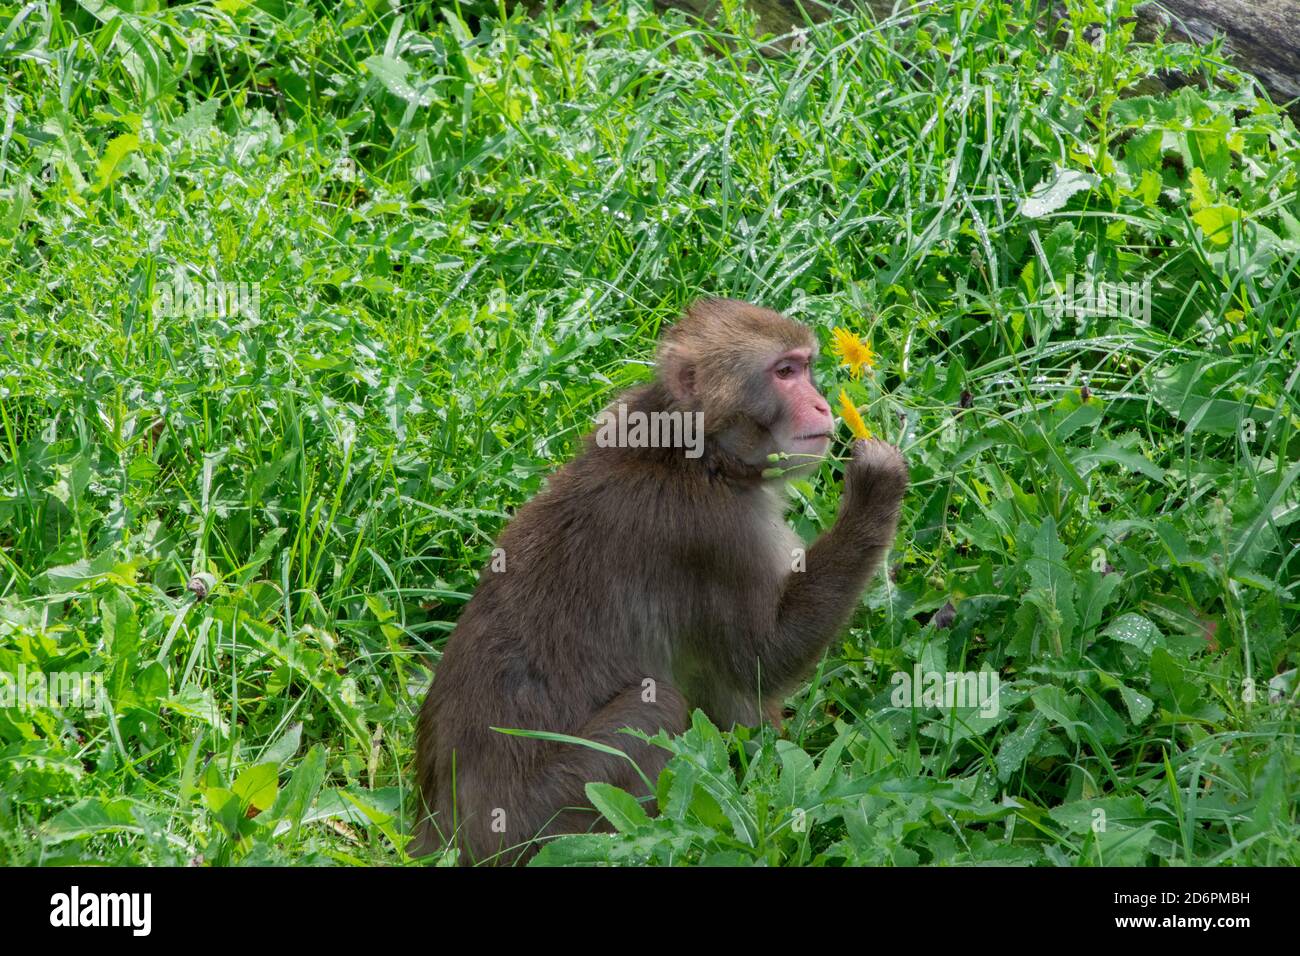 A Japanese Macaque eating a Dandelion bud. Stock Photo